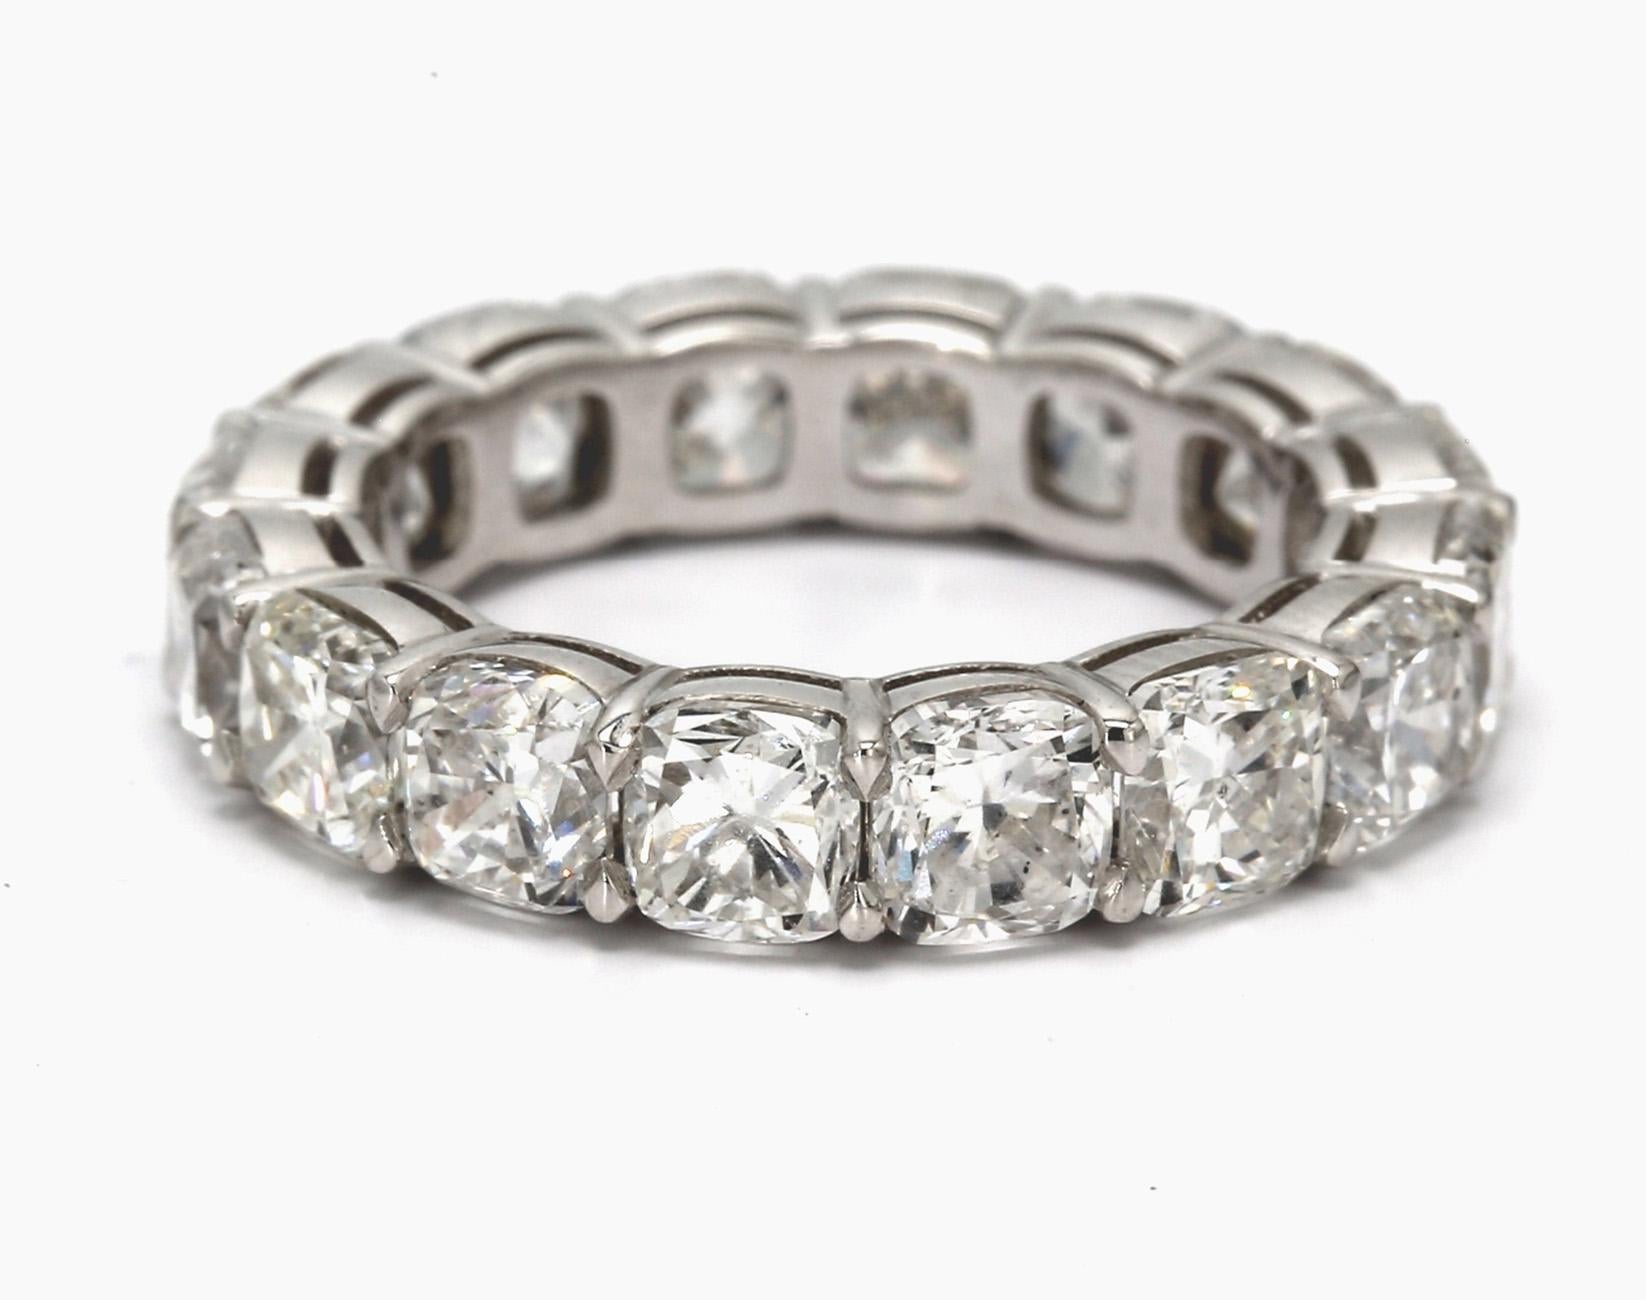 Eternity band in platinum with basket claw prong set square cushion cut diamonds. D7.98ct.t.w.